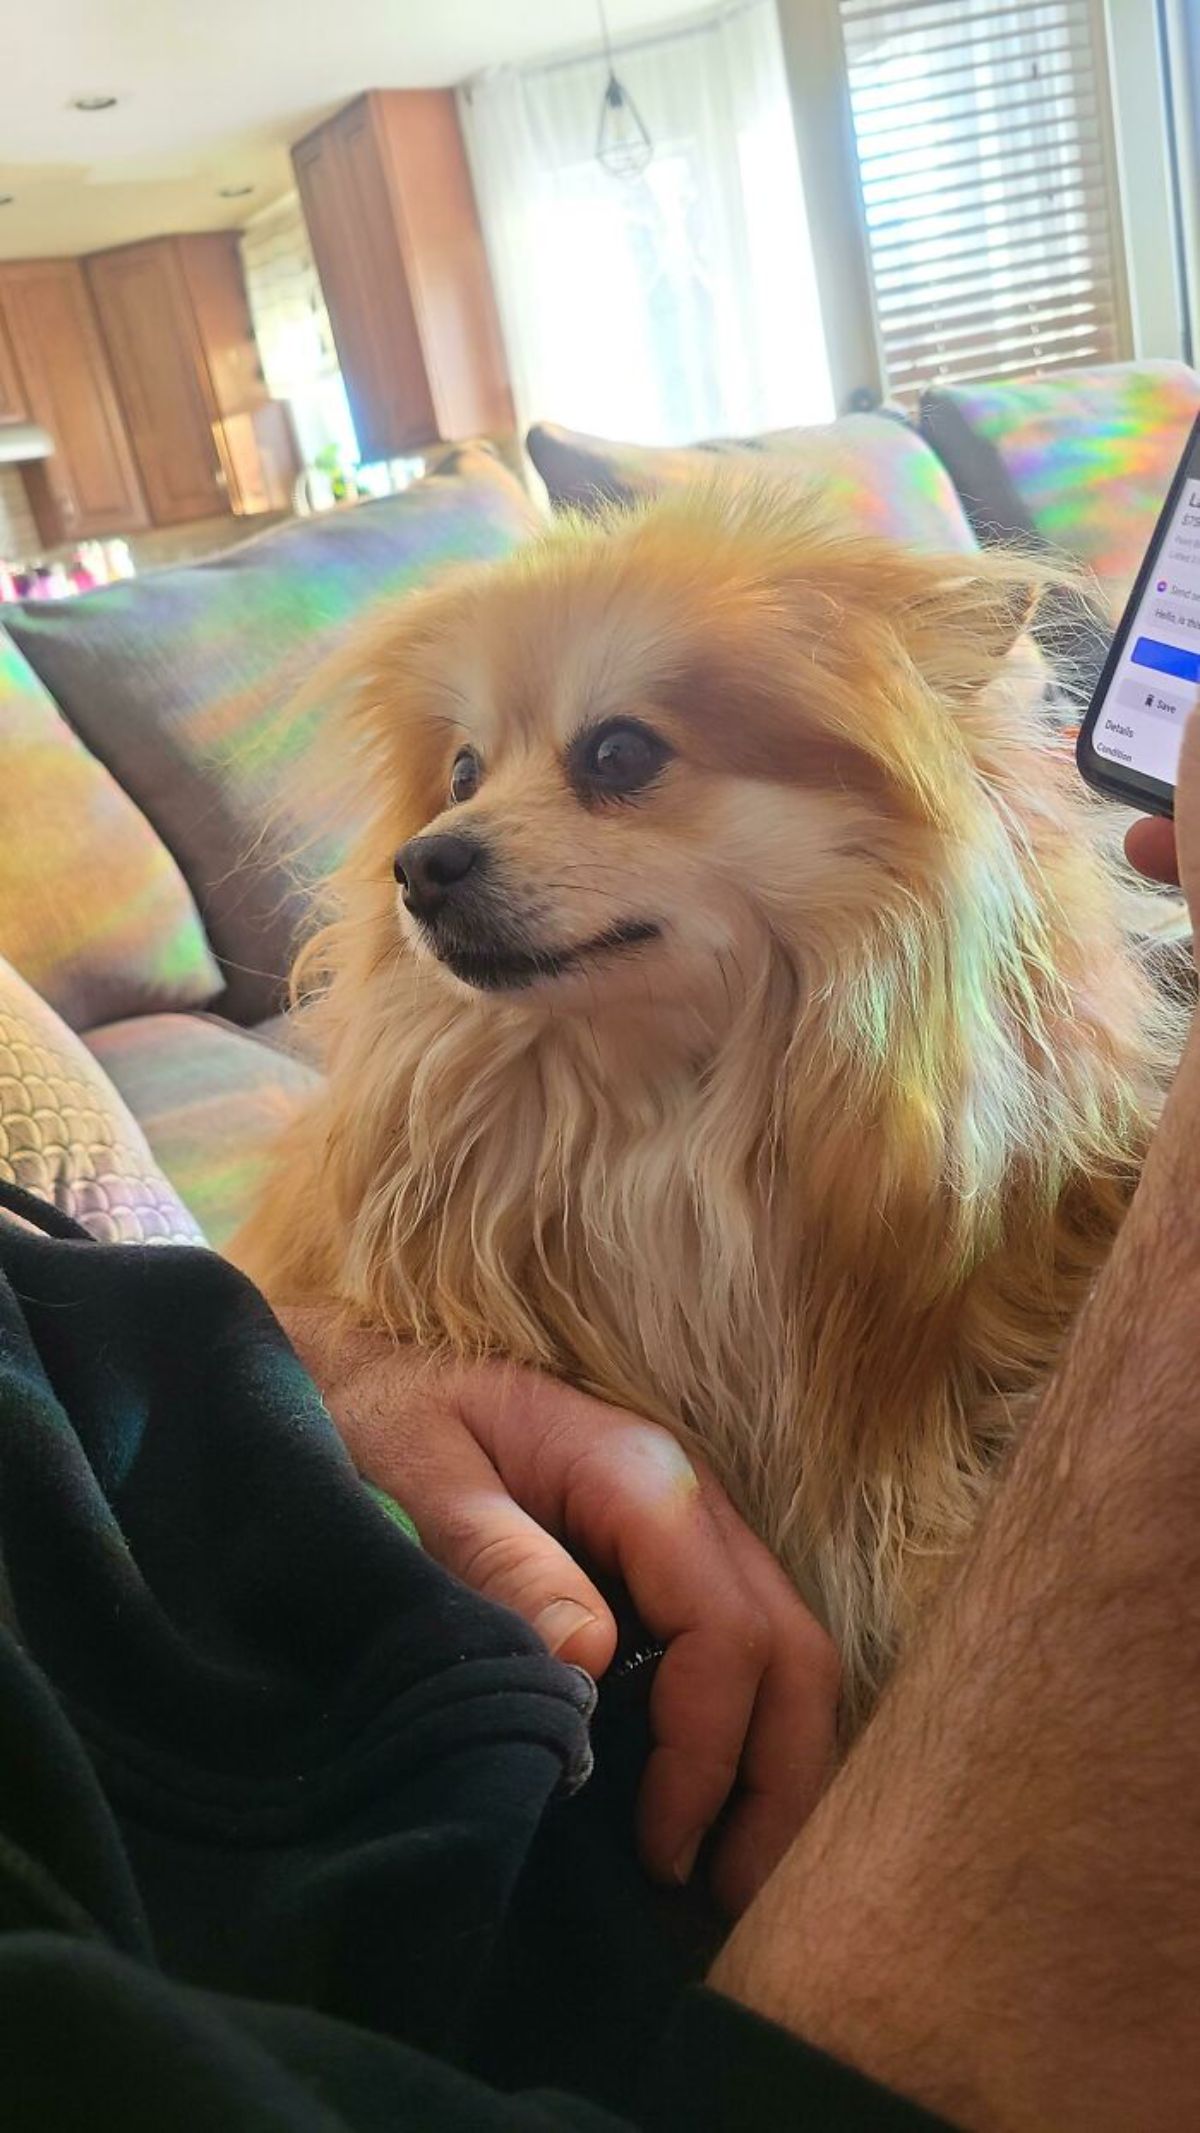 fluffy brown dog looking lovingly at someone